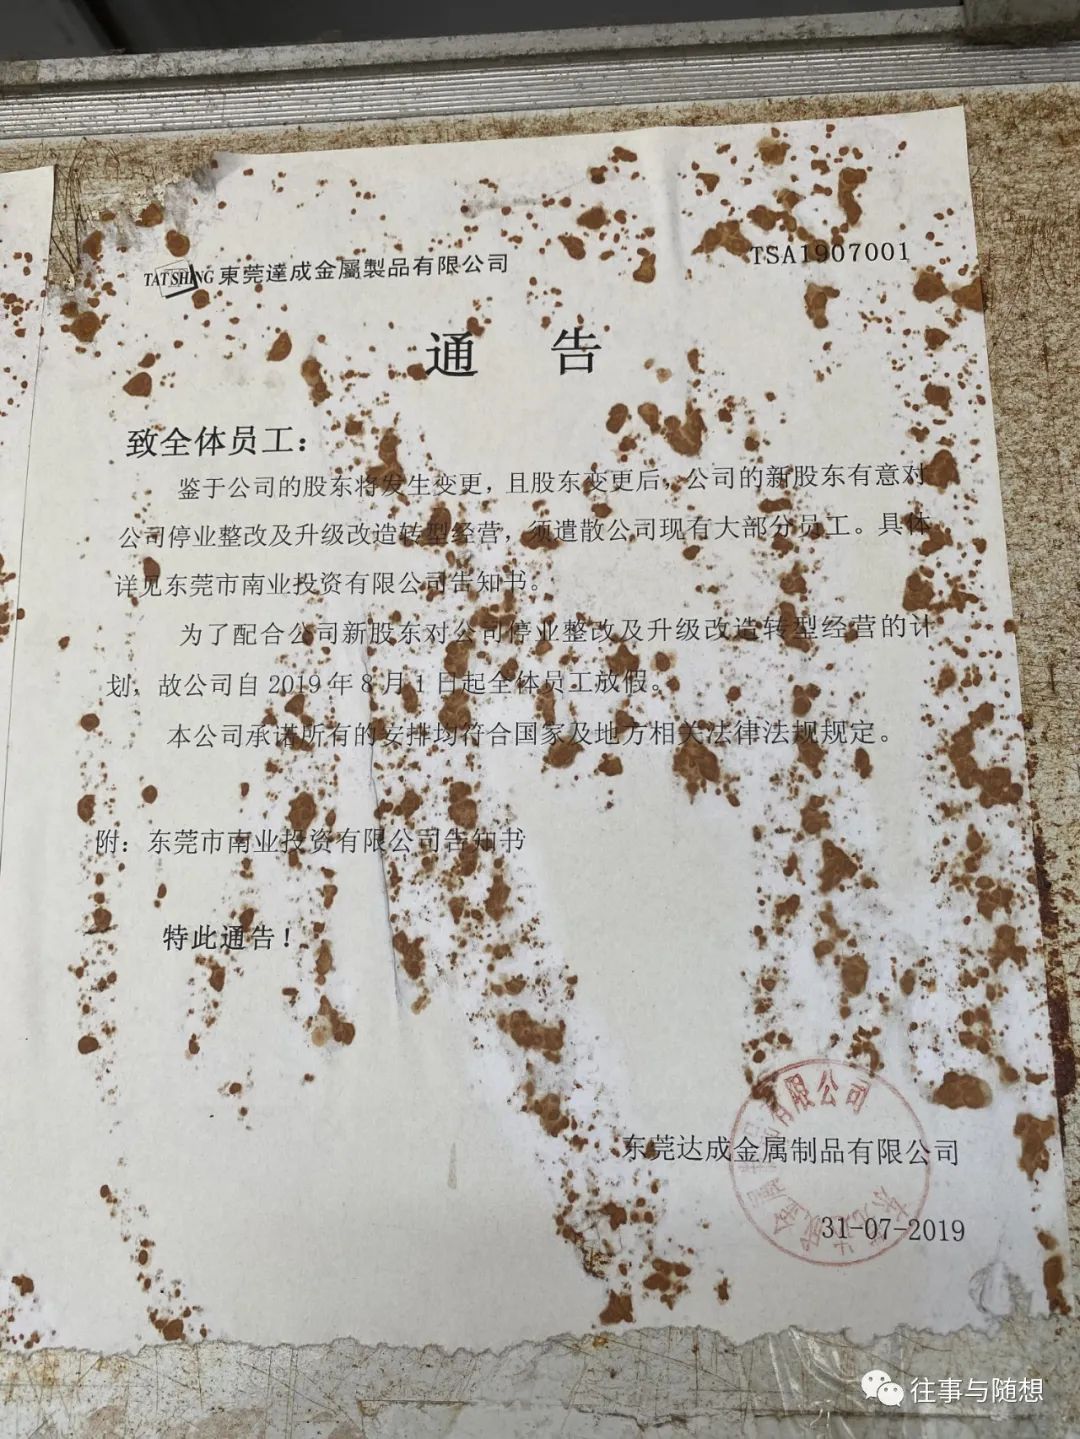 A stained and tattered piece of paper posted to the wall, announcing layoffs at the factory